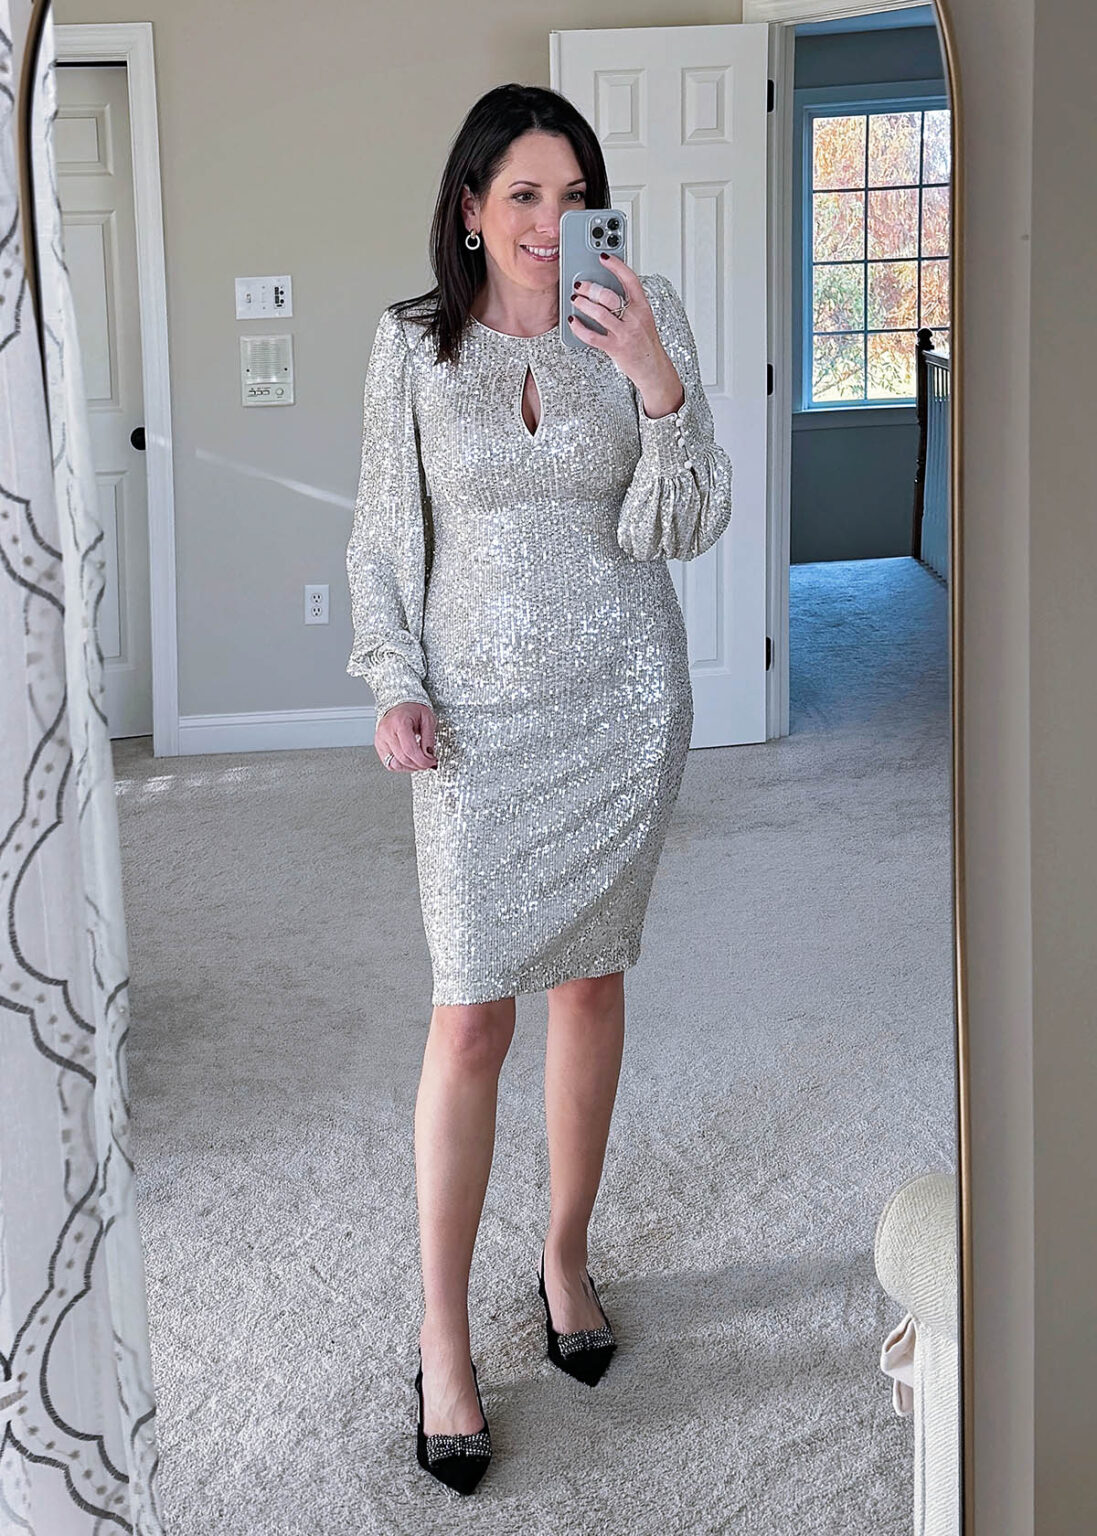 Try-On Haul: Holiday Cocktail Dresses